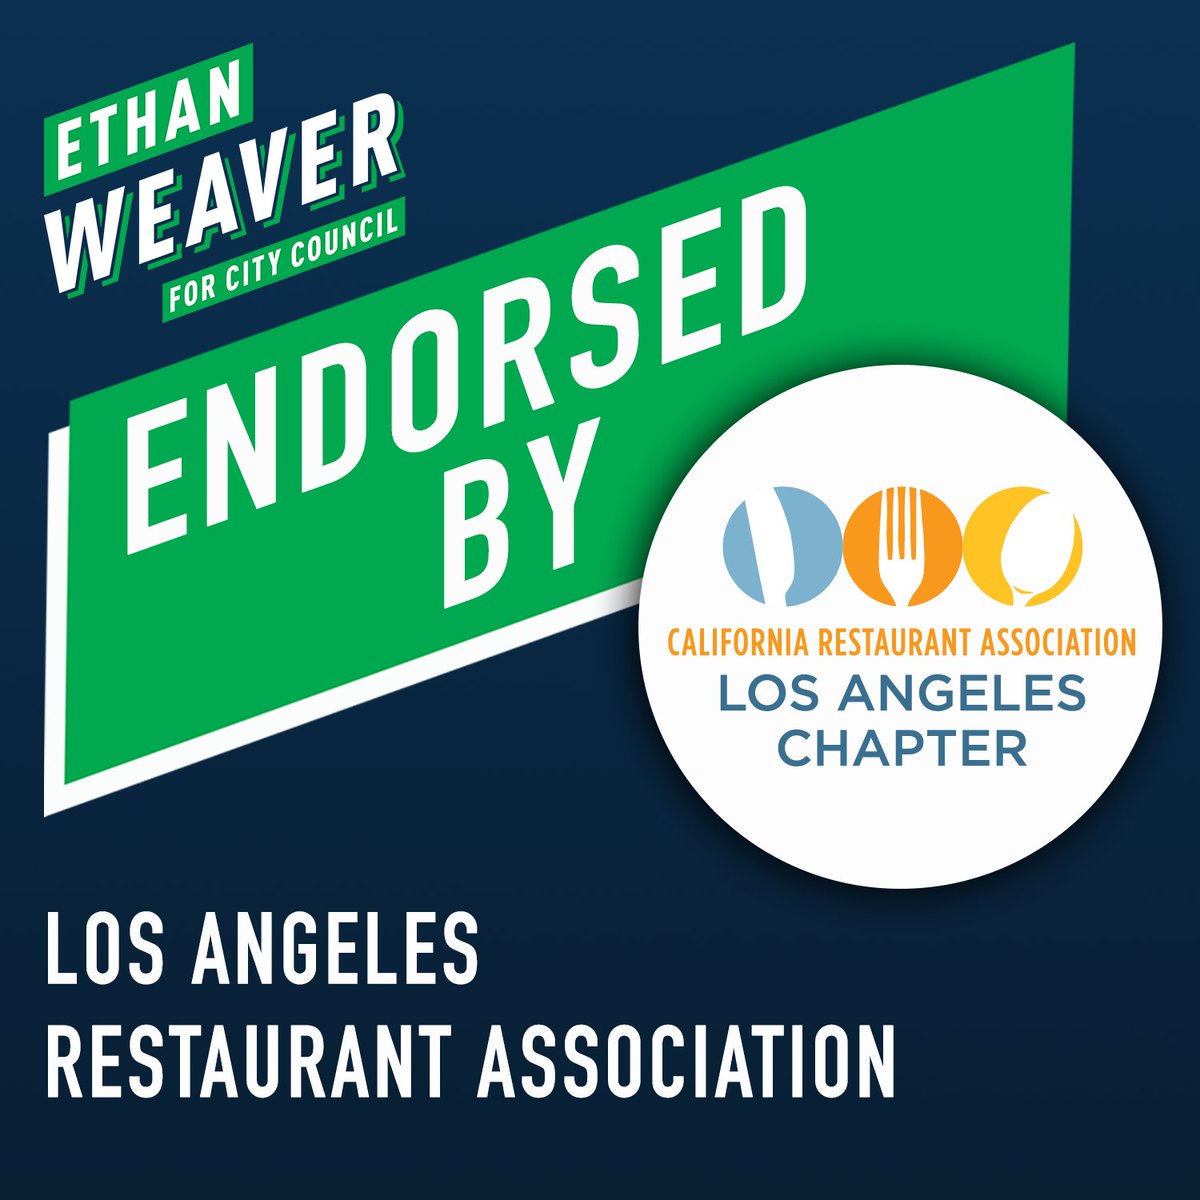 Our city's restaurants are not just places to eat; they are community gathering spots and the heart of our local economy. With the support of the Los Angeles Restaurant Association, I'm committed to working tirelessly to support the success of small businesses across LA.